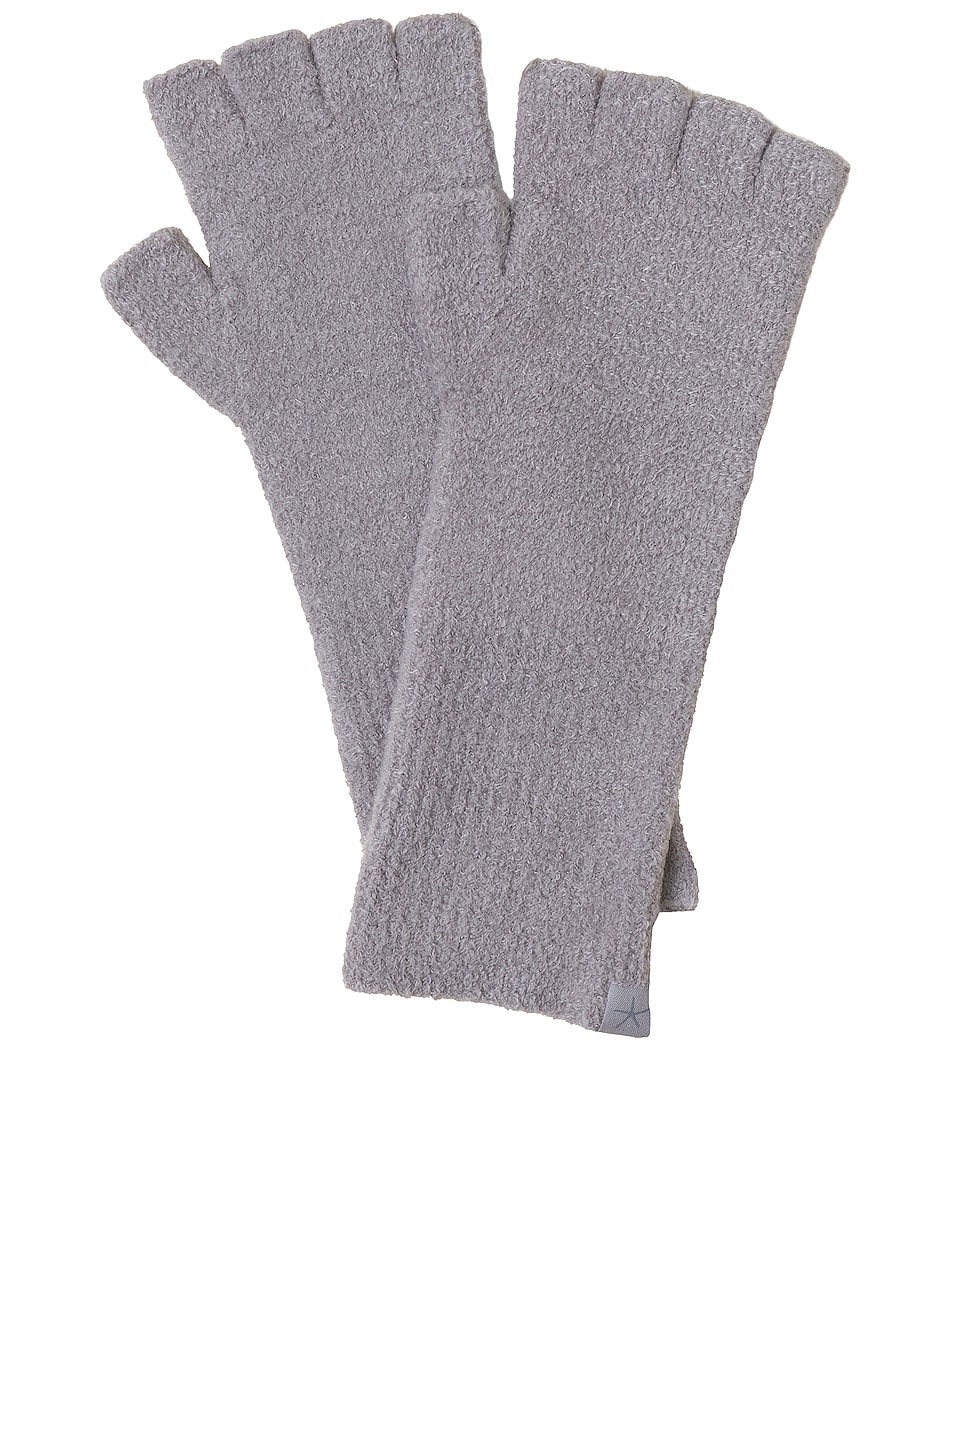 Fingerless Wool Gloves  Cool outfits, Dream clothes, Clothes